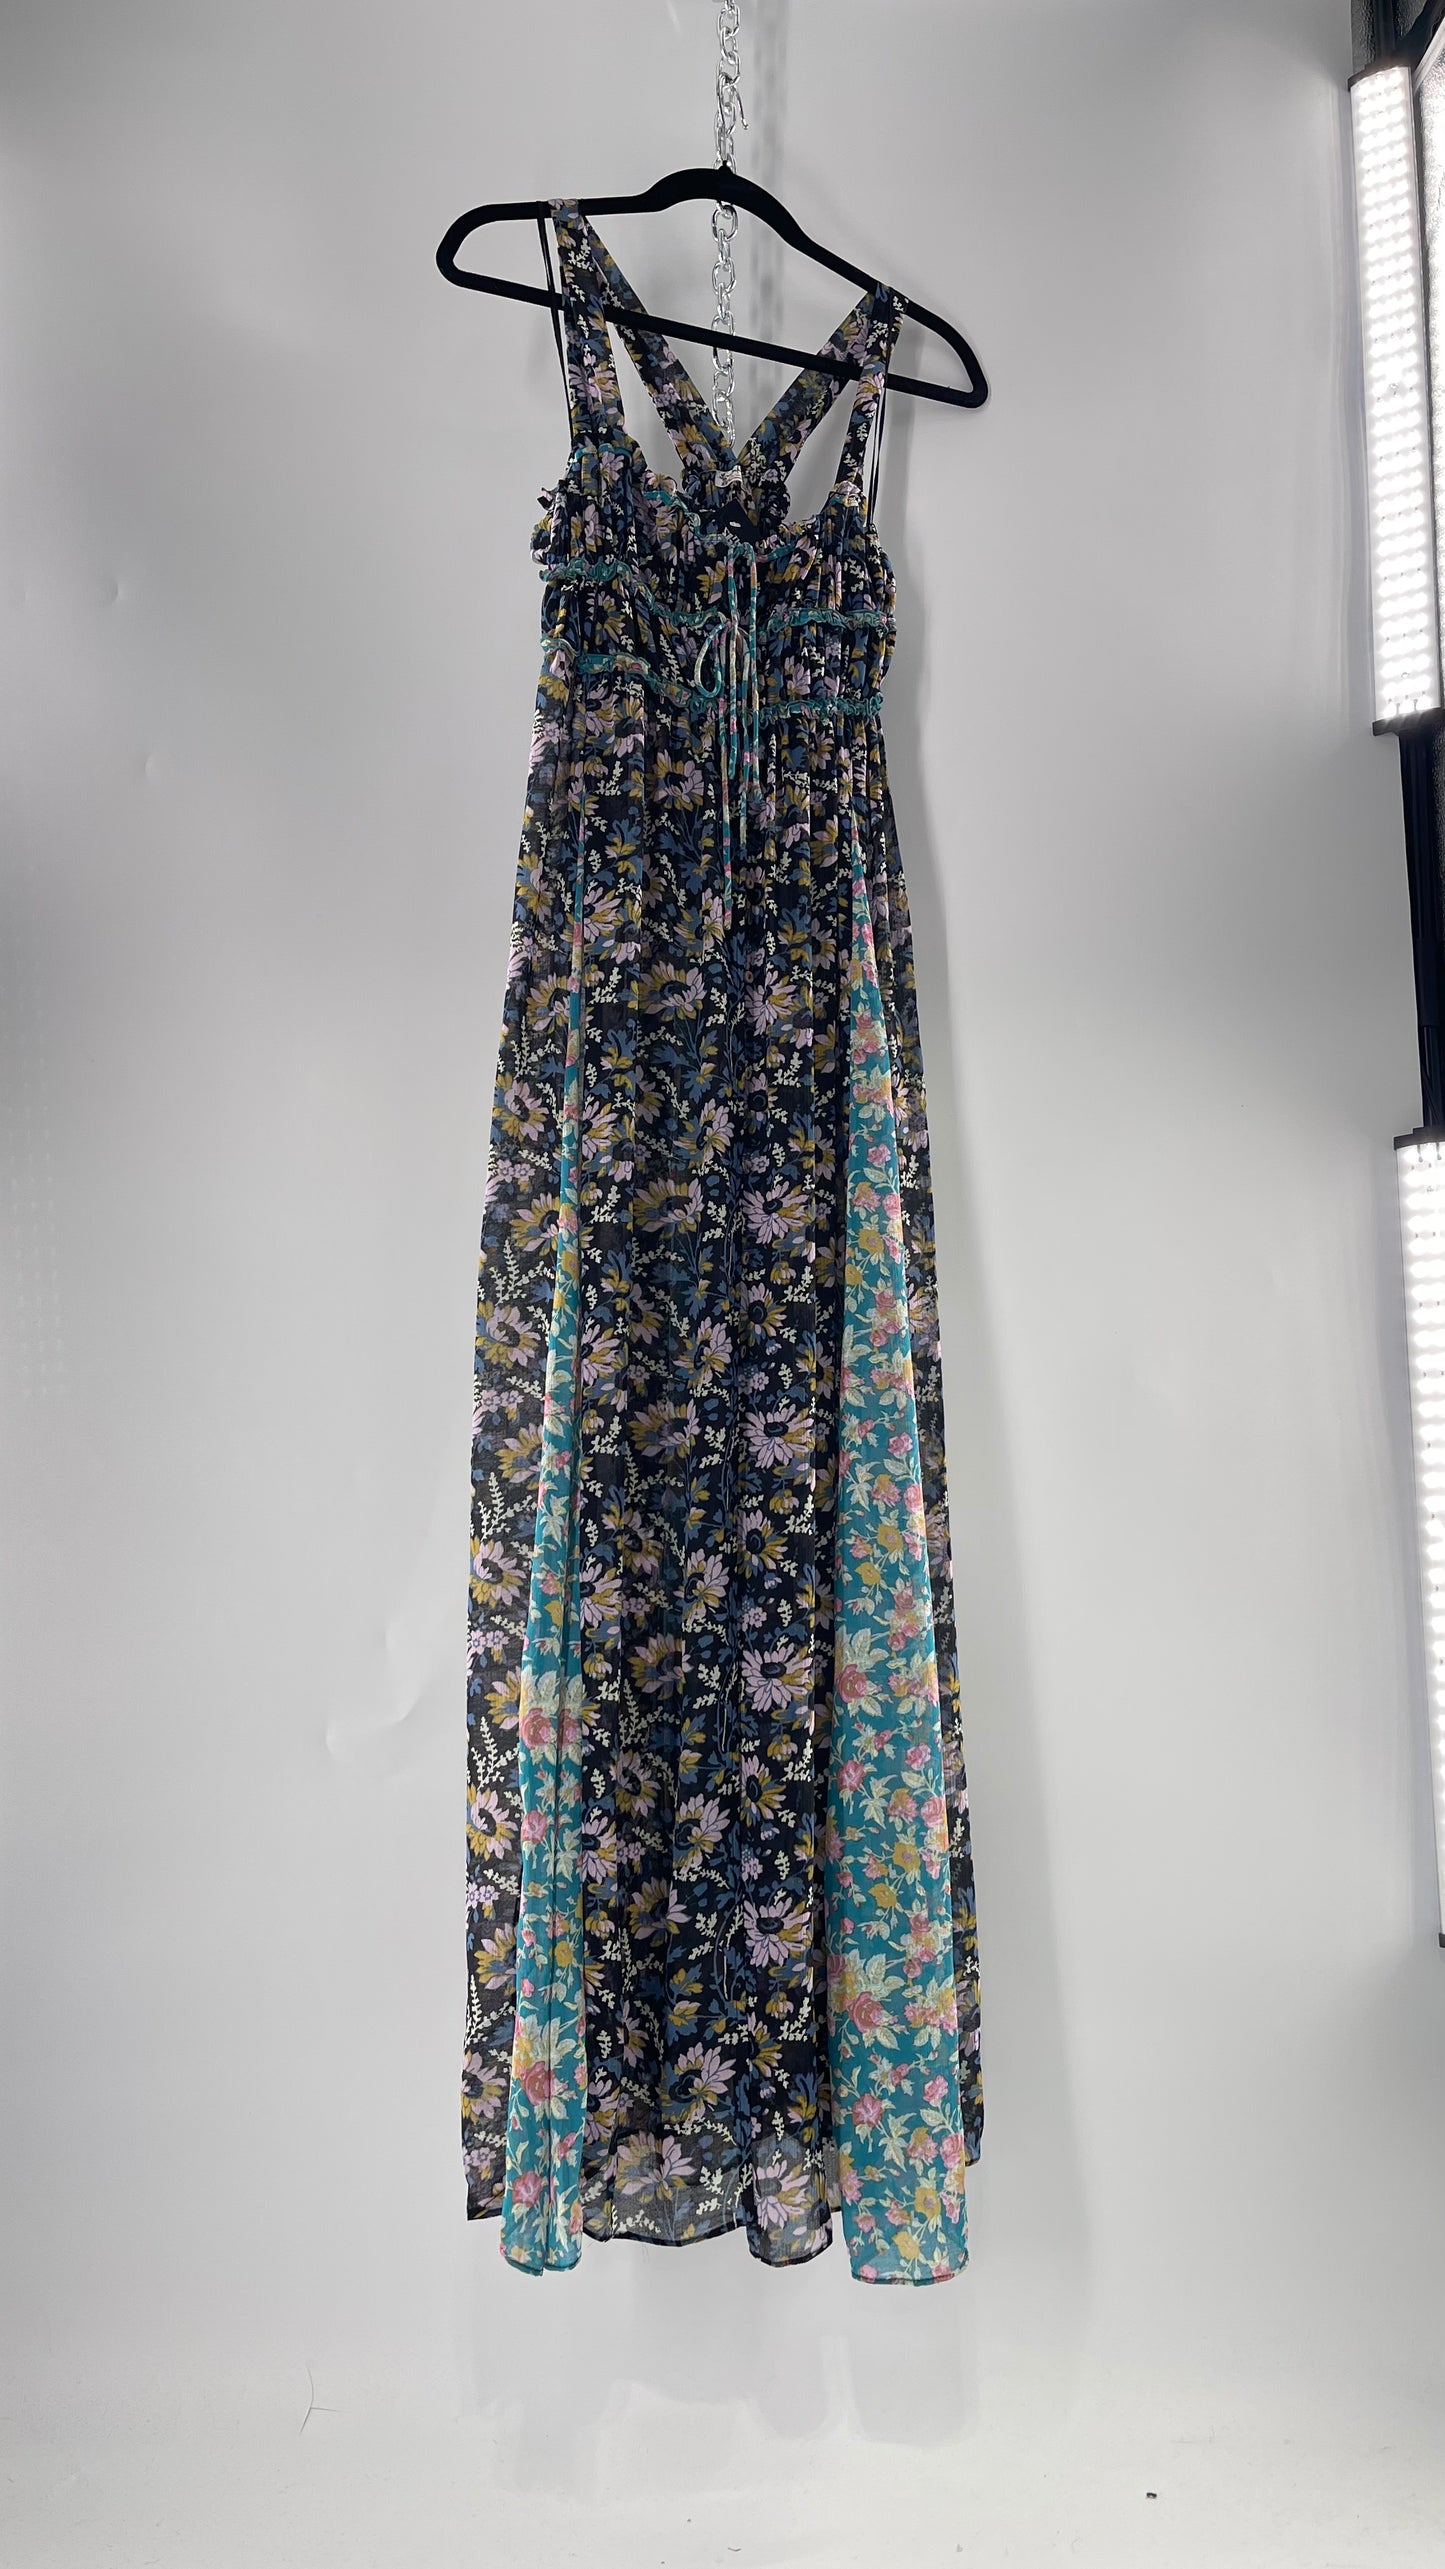 Intimately Free People Black and Teal Mixed Pattern Floral Maxi Dress with Tags Attached (XS)